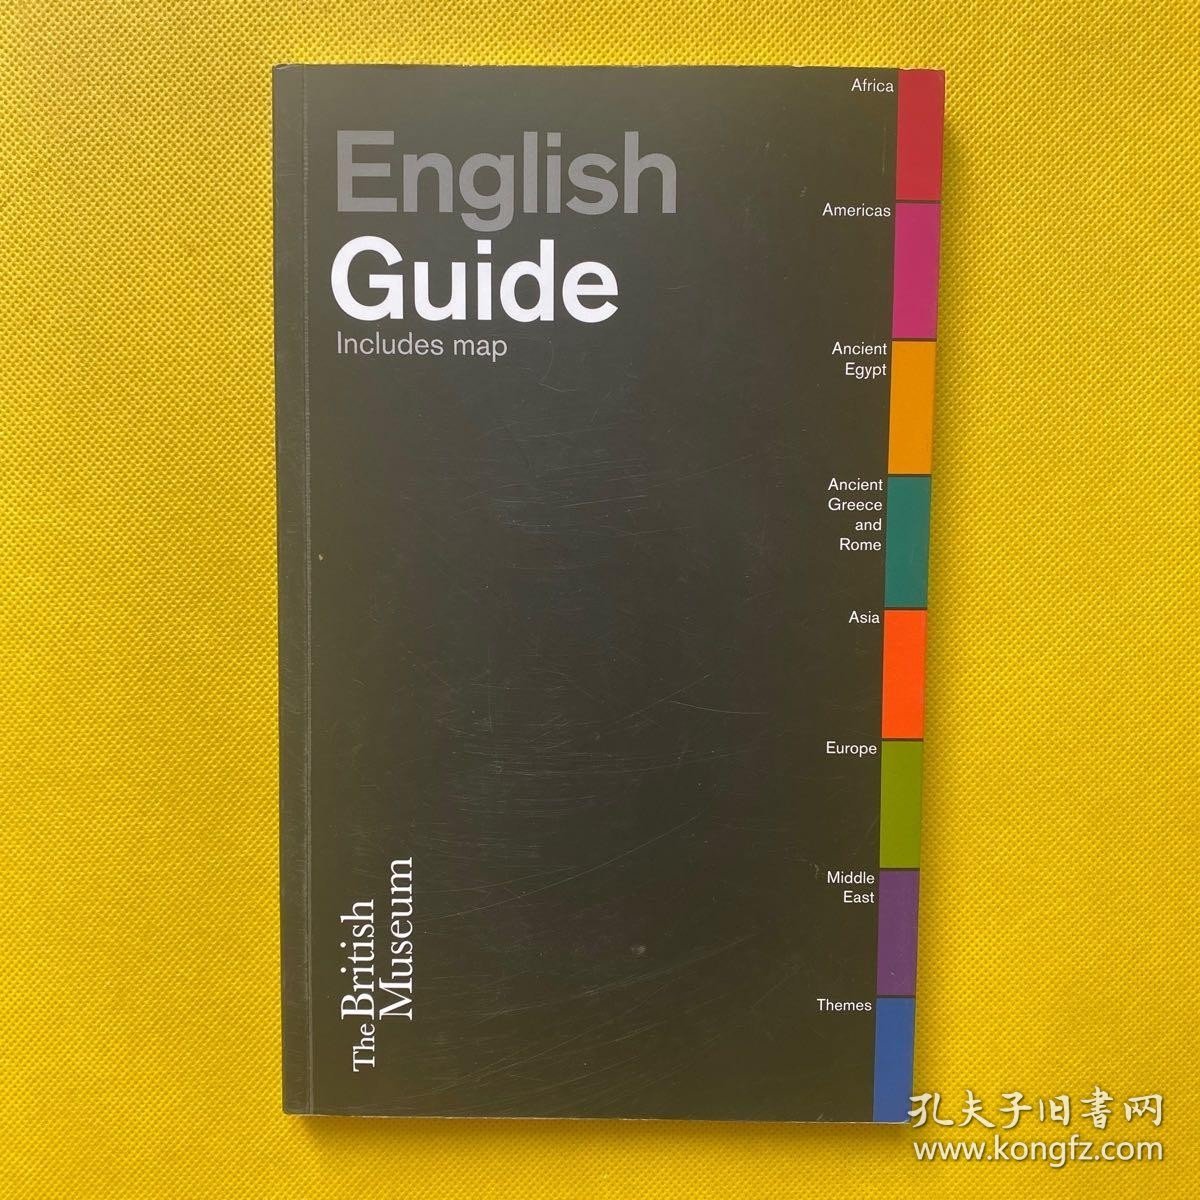 The British Museum Guide